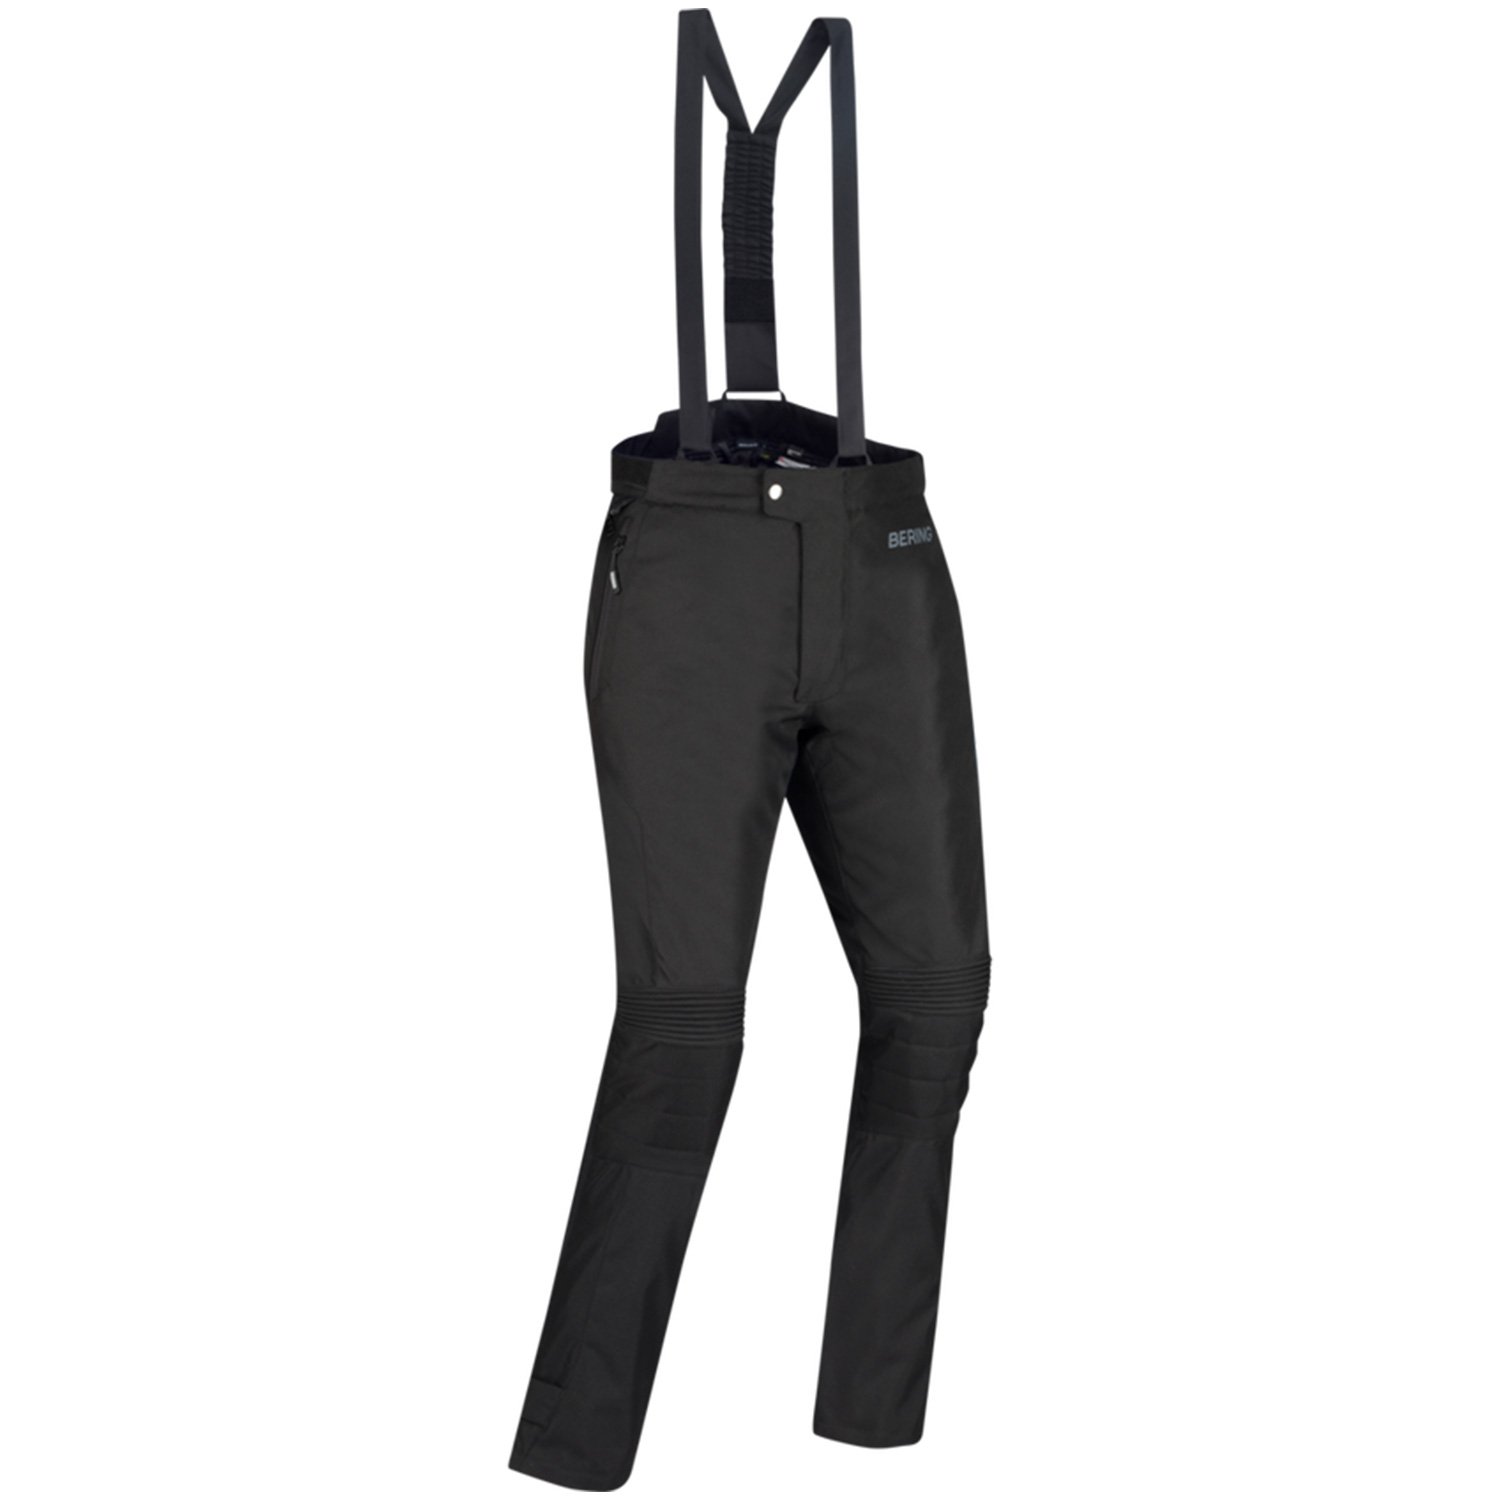 Image of Bering Siberia Trousers Black Size 2XL ID 3660815181546